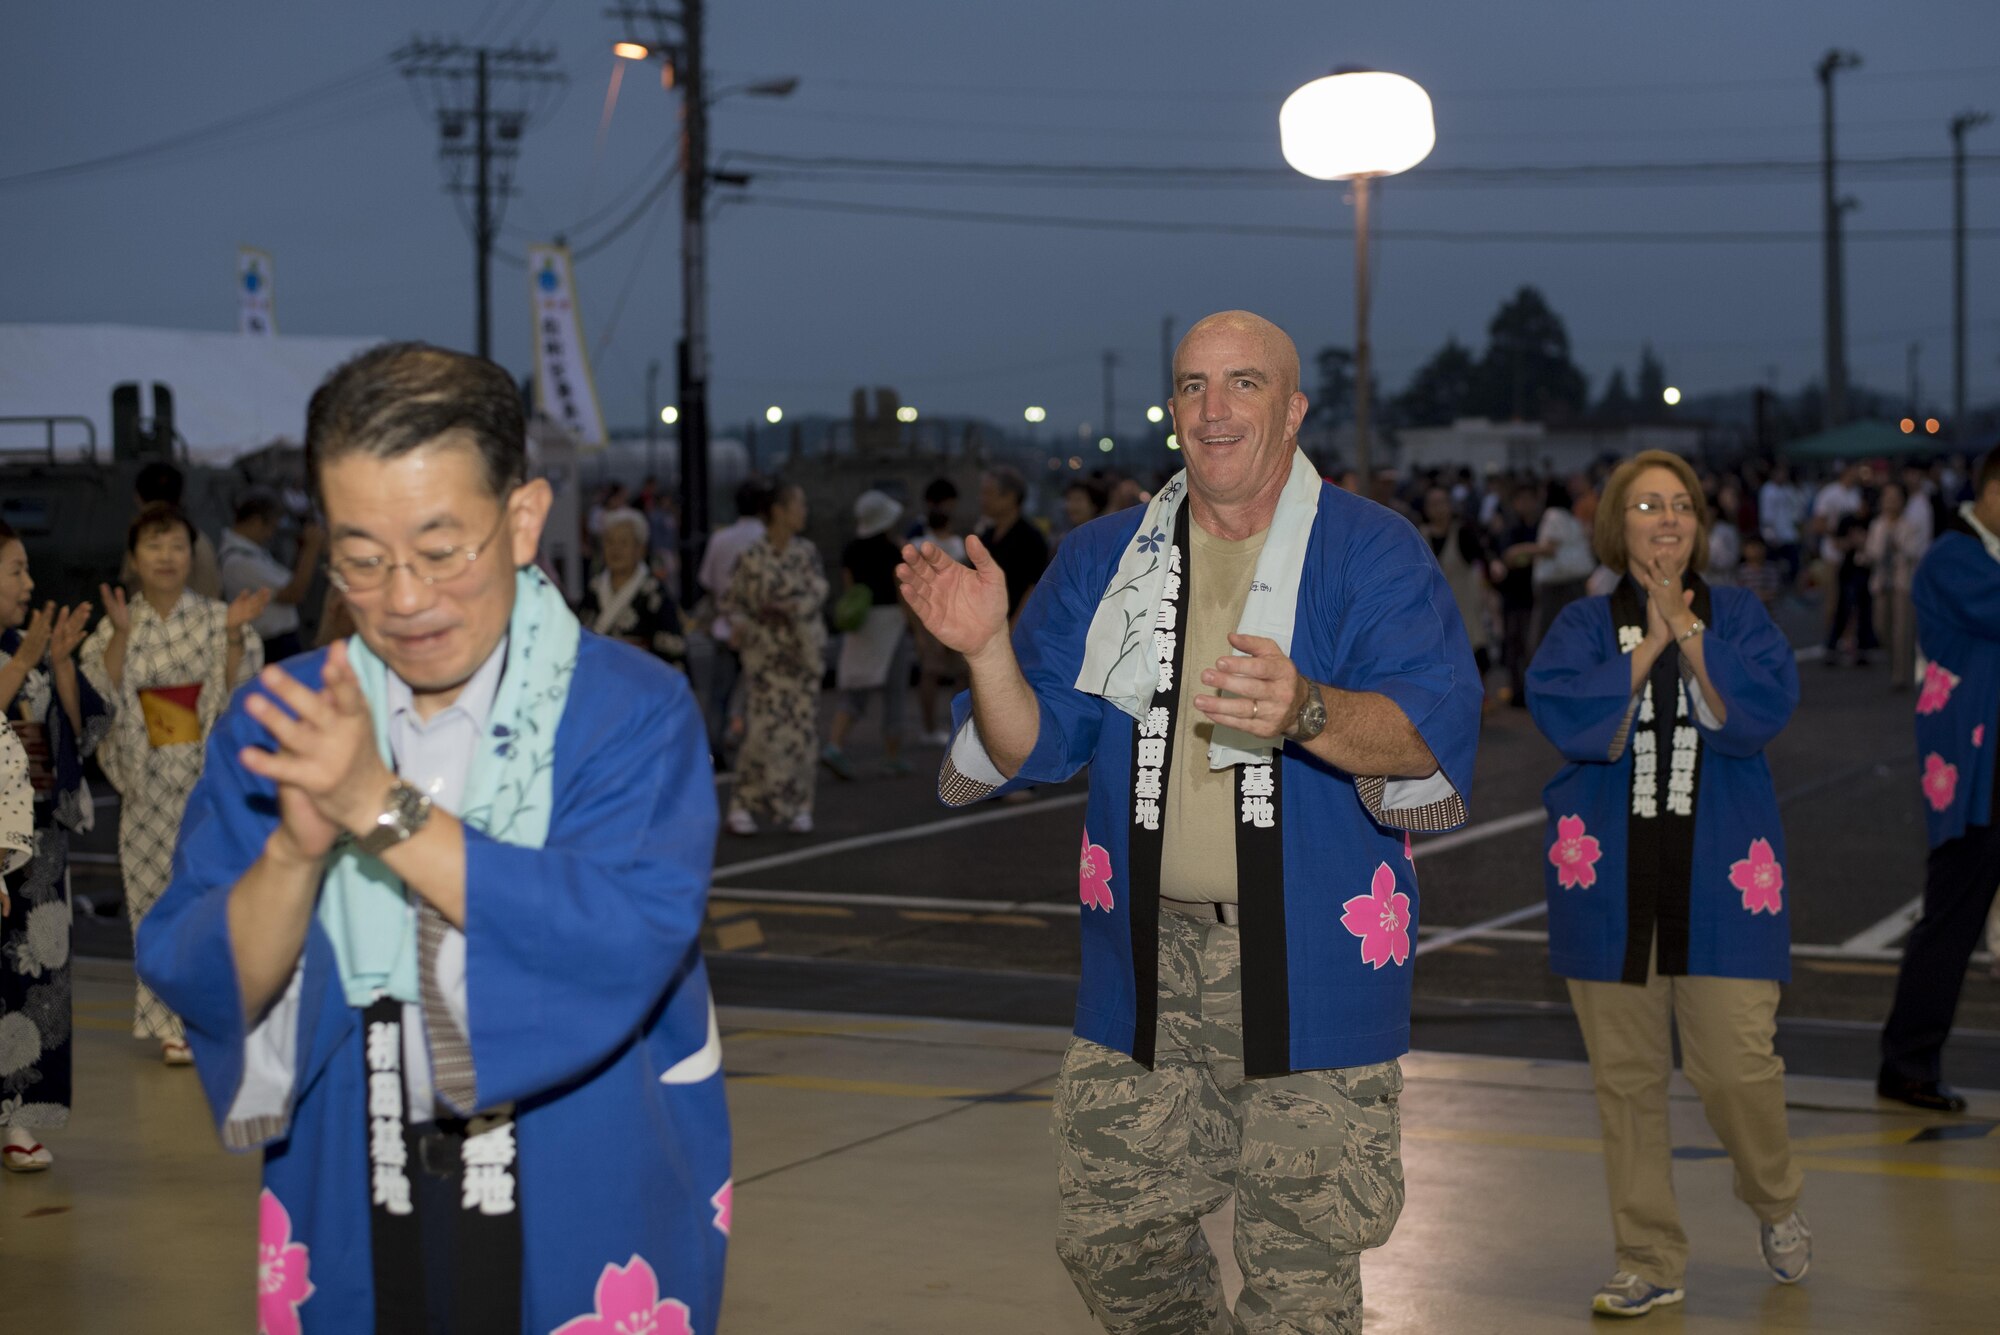 Col. Kenneth Moss, 374th Airlift Wing commander, performs in a Bon dance during the 2016 Friendship Festival at Yokota Air Base, Japan, Sept. 18, 2016. Moss participated in the dance with other Yokota leadership. (U.S. Air Force photo by Staff Sgt. Michael Washburn/Released)